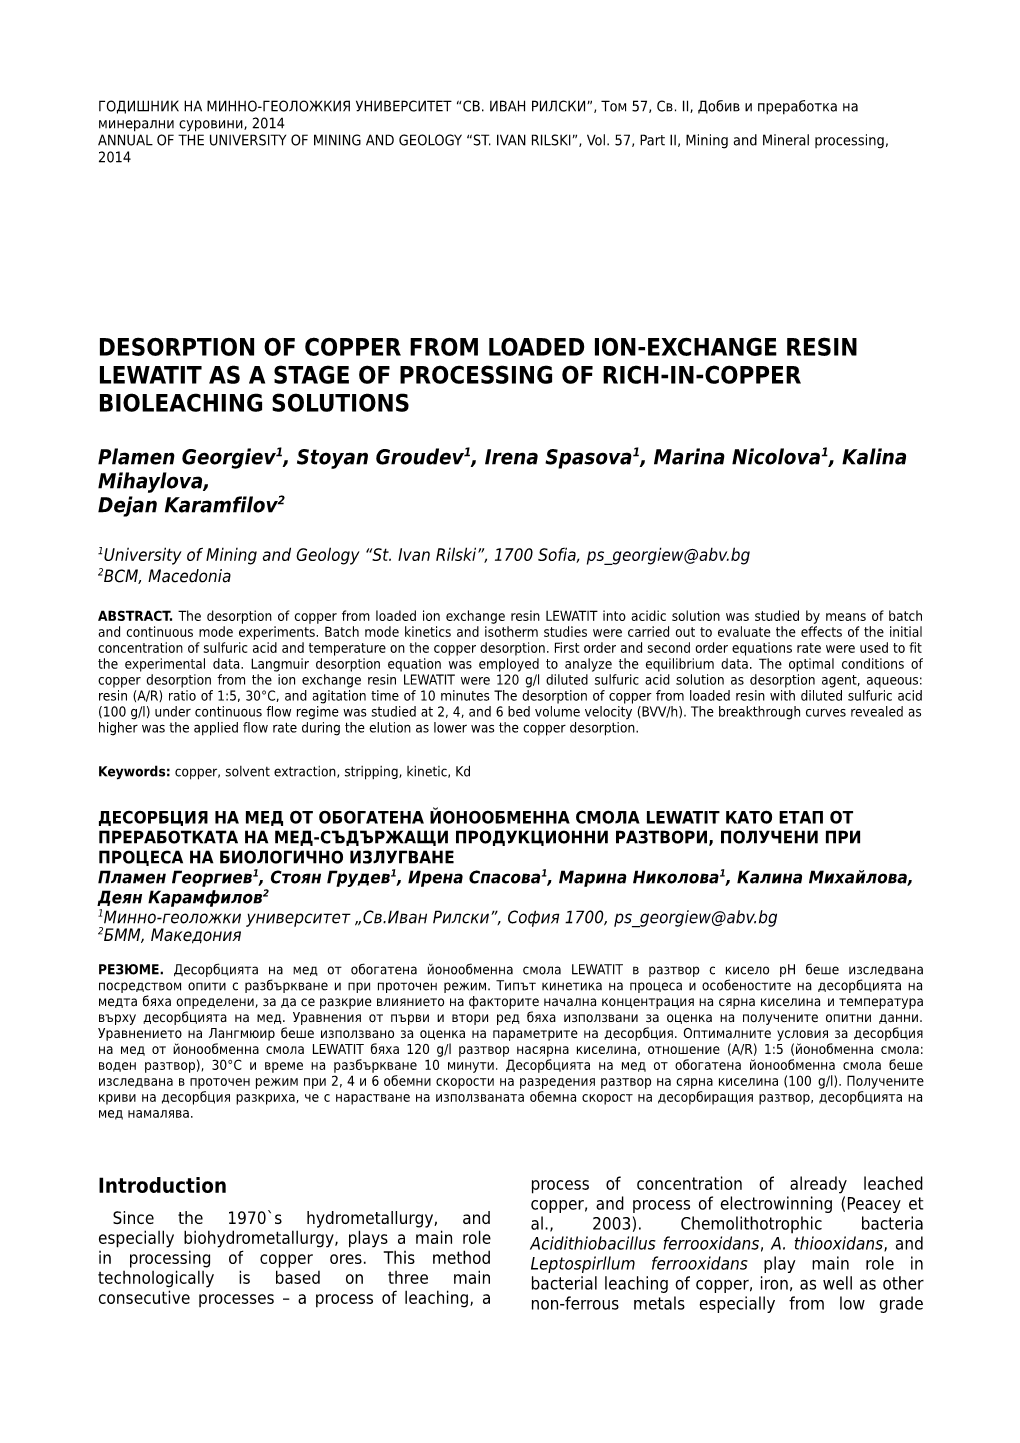 Selective Separation of Copper from Rich-In-Iron Bioleaching Solution by Means of Processes